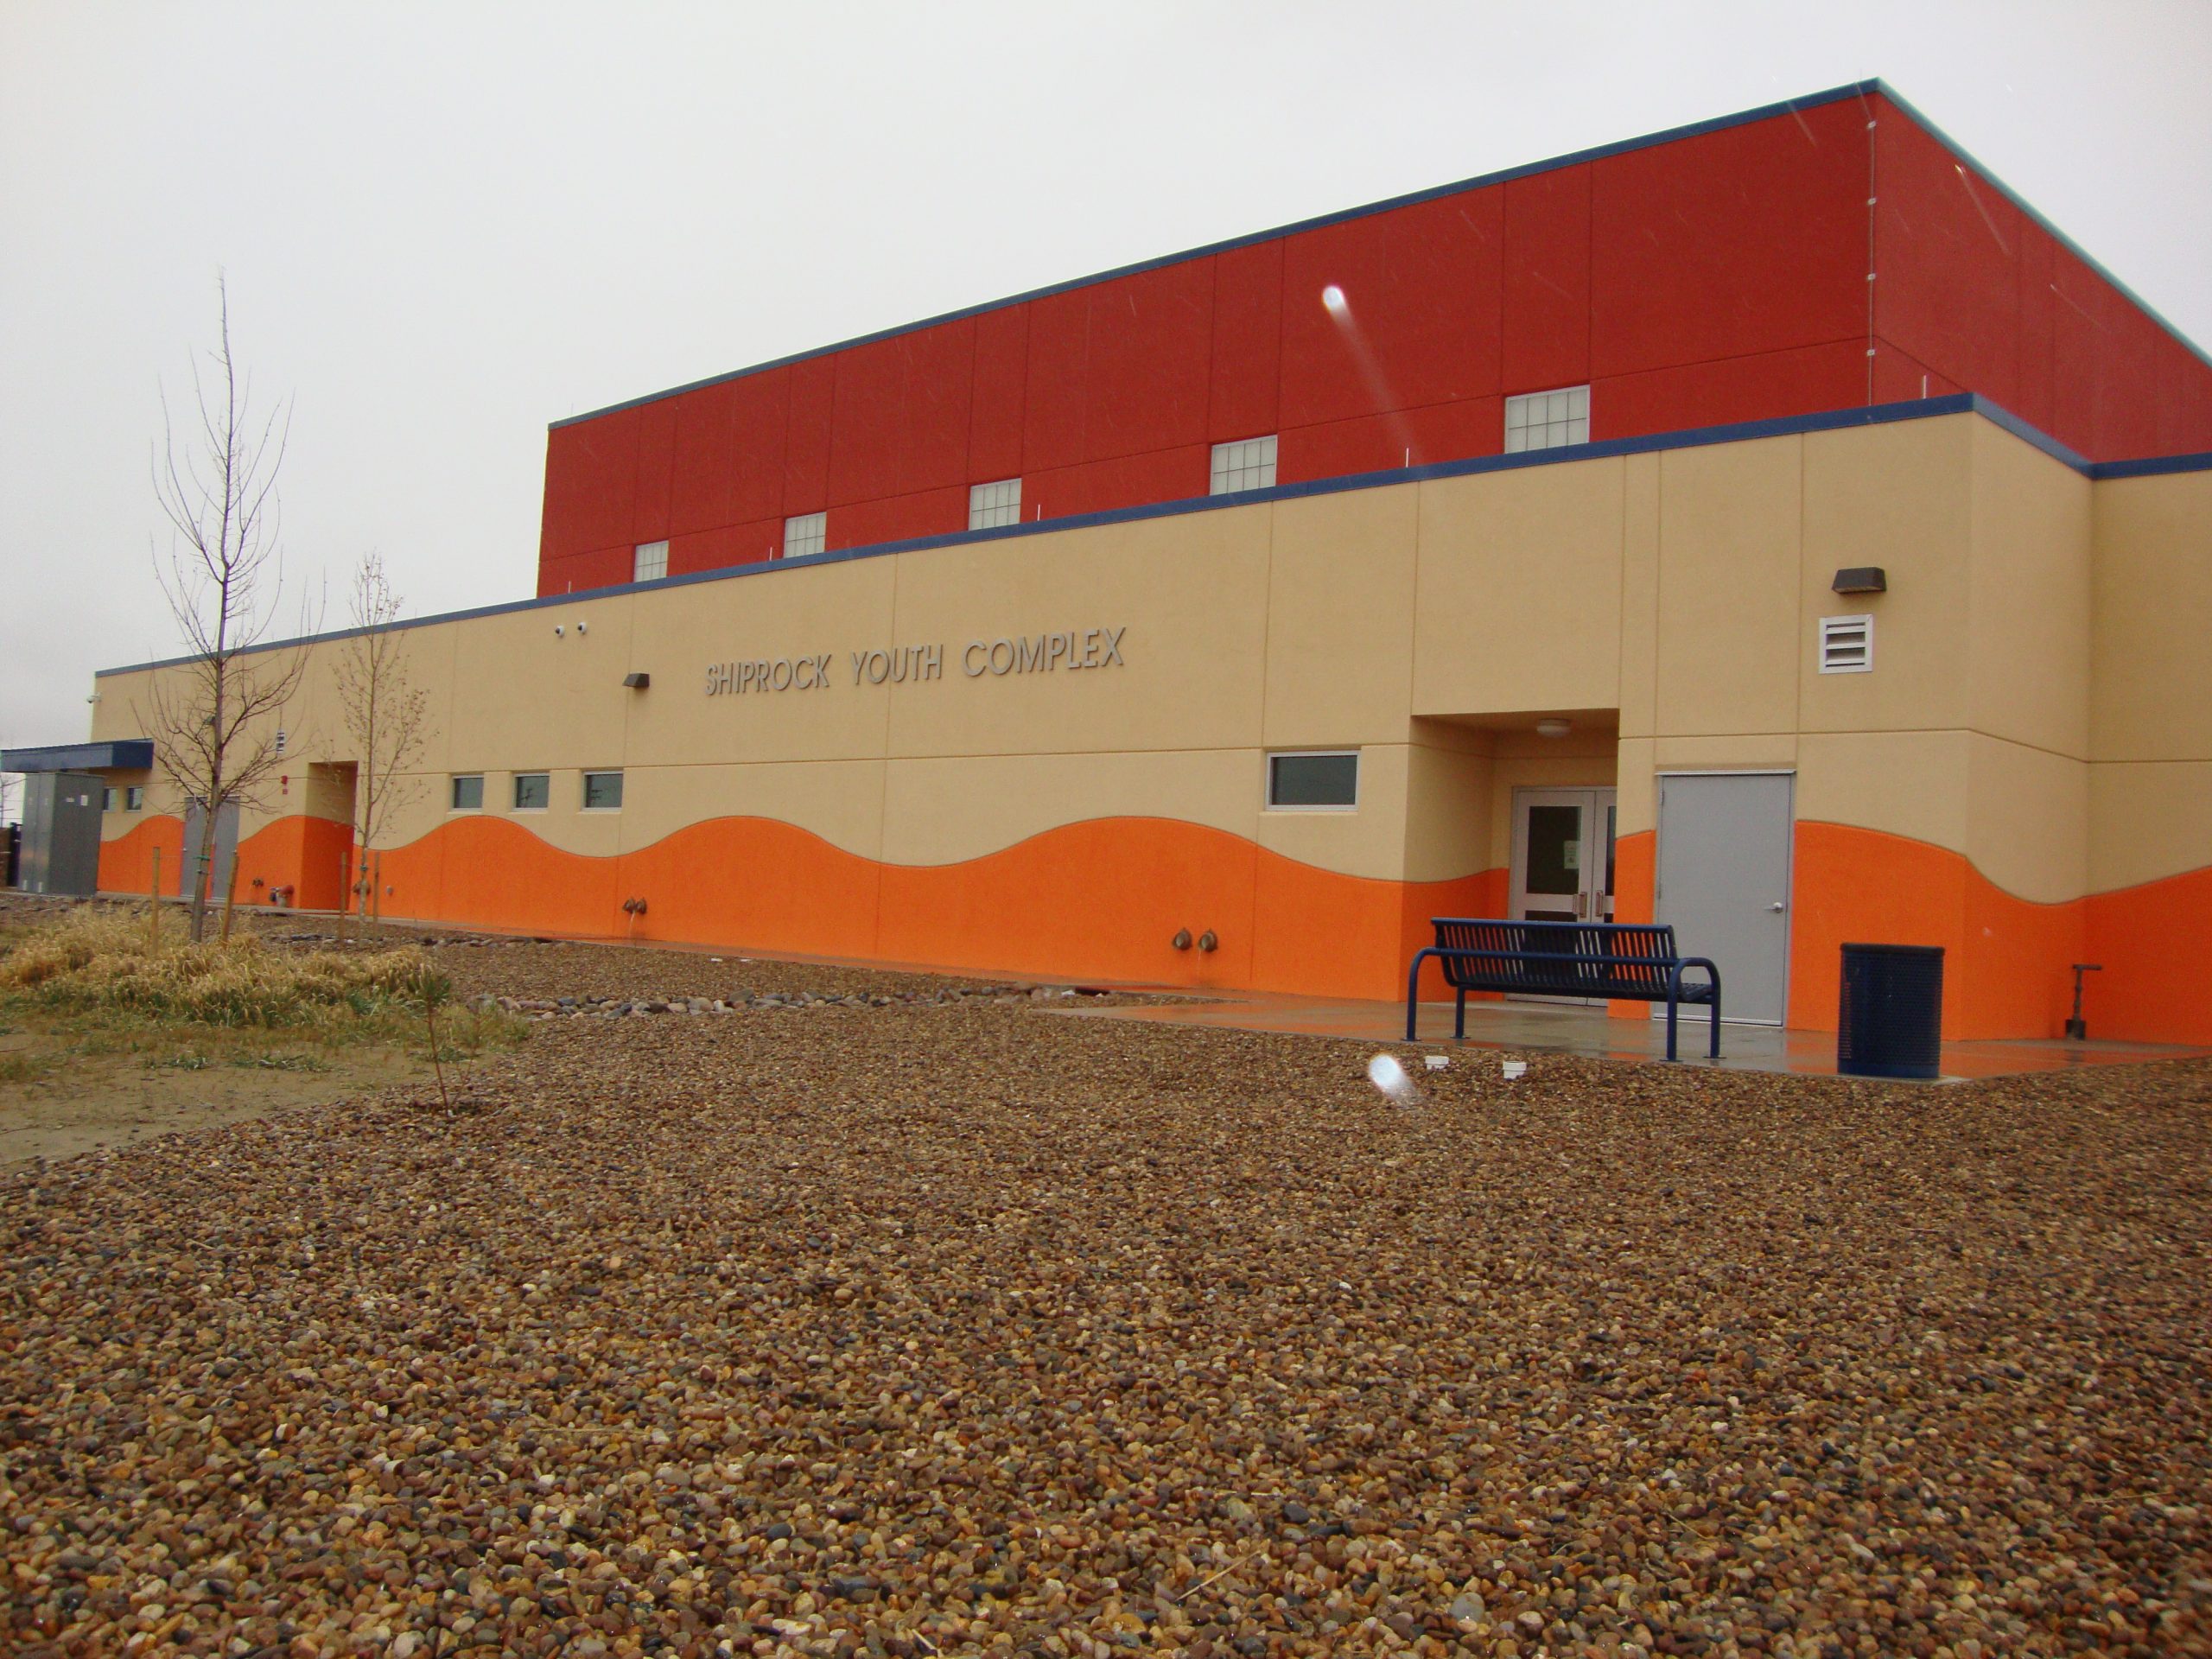 Shiprock Youth Complex